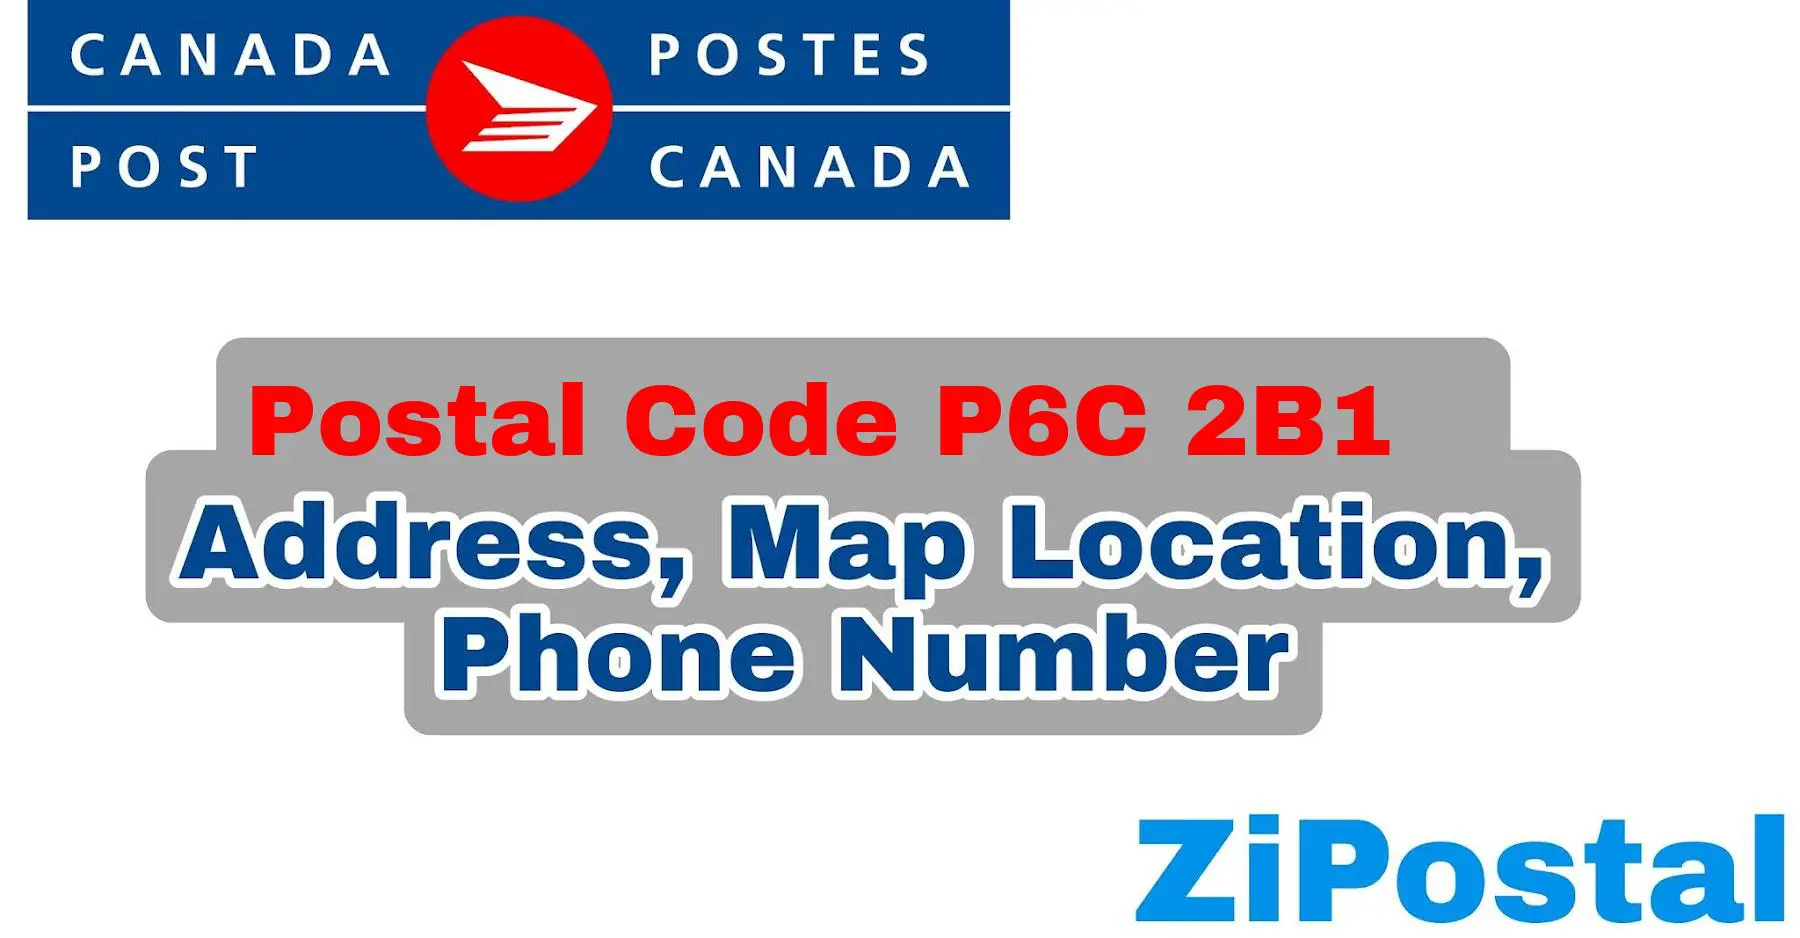 Postal Code P6C 2B1 Address Map Location and Phone Number